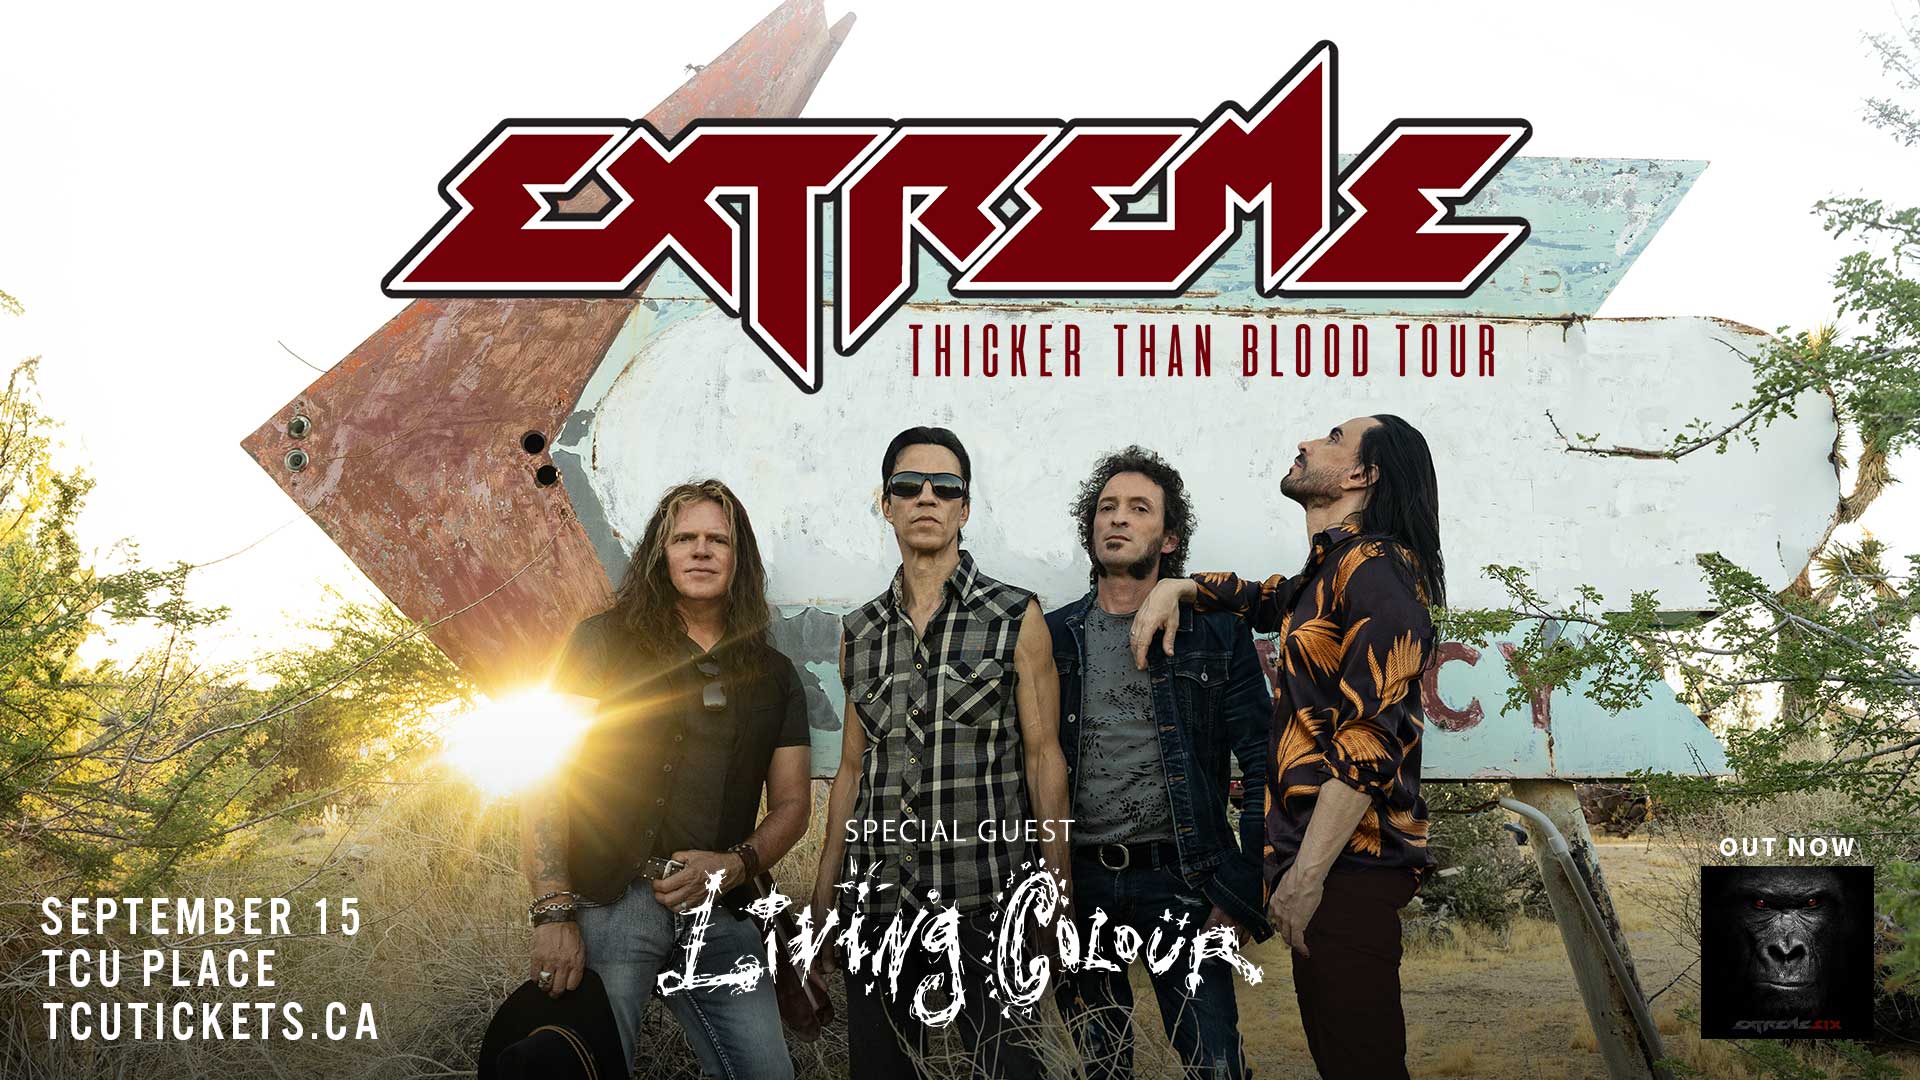 Extreme: Thicker Than Blood Tour with special guests Living Colour